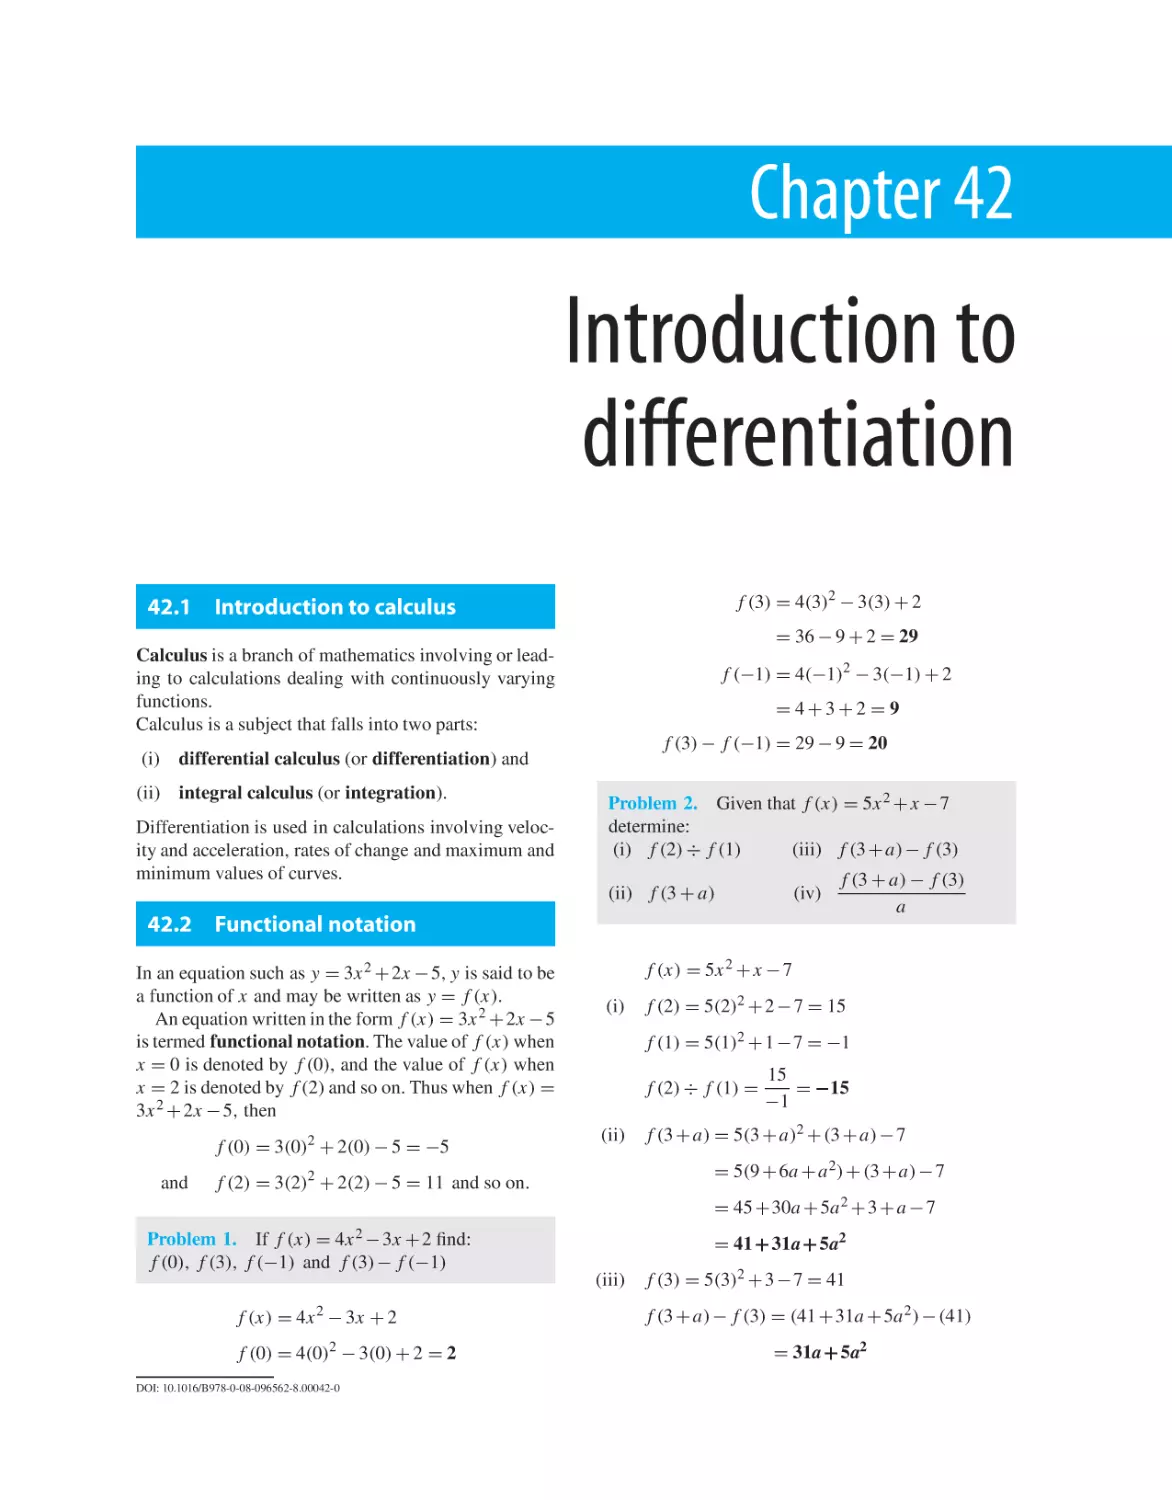 Chapter 42. Introduction to differentiation
42.1 Introduction to calculus
42.2 Functional notation